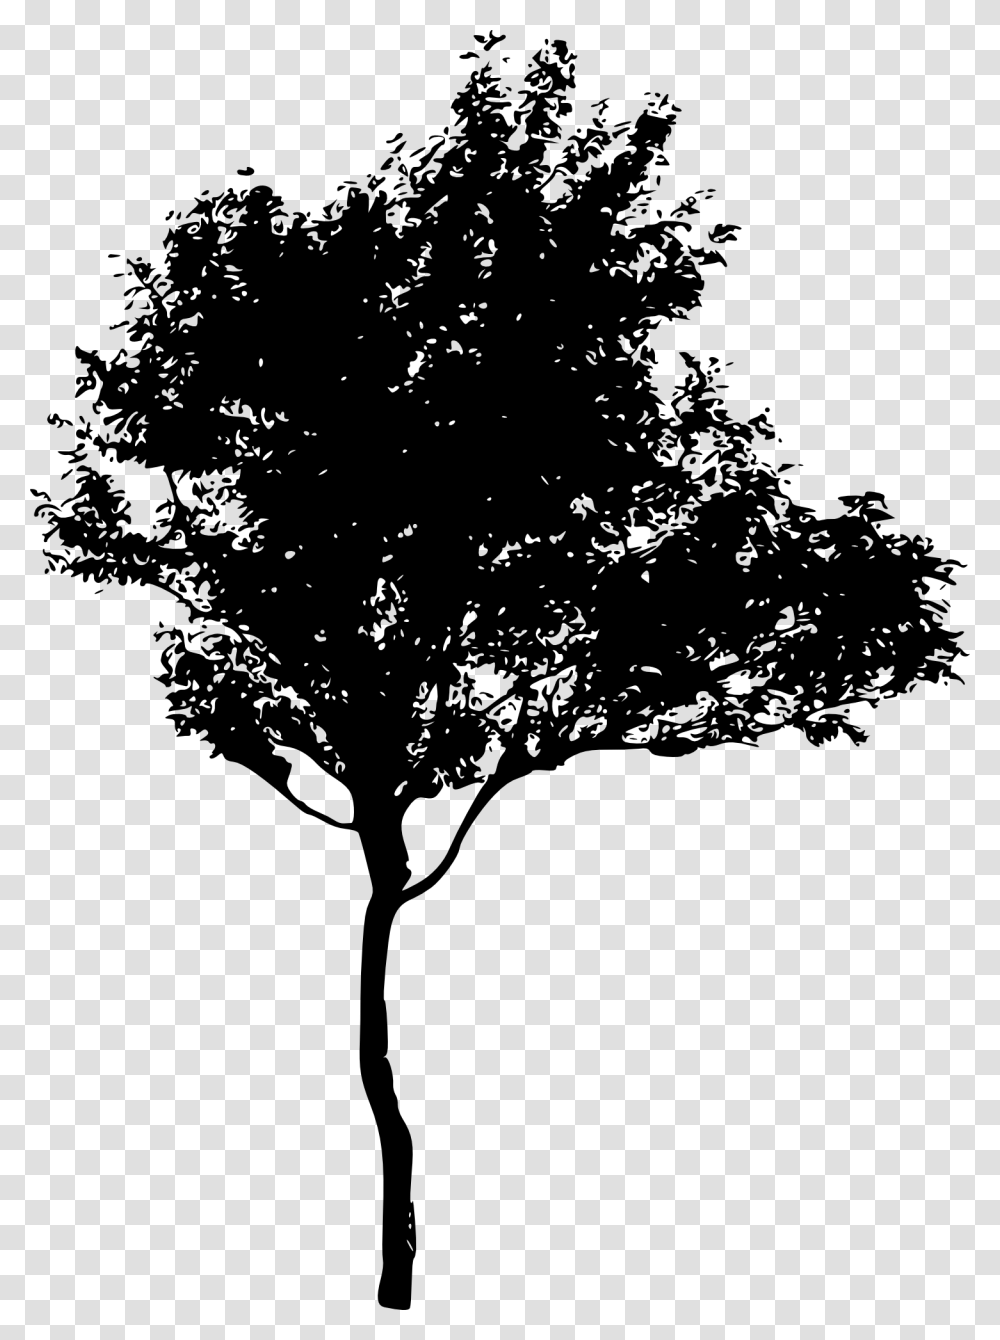 Tree Silhouette 2 Silhouette Of A Tree, Plant, Stencil, Leaf, Tree Trunk Transparent Png